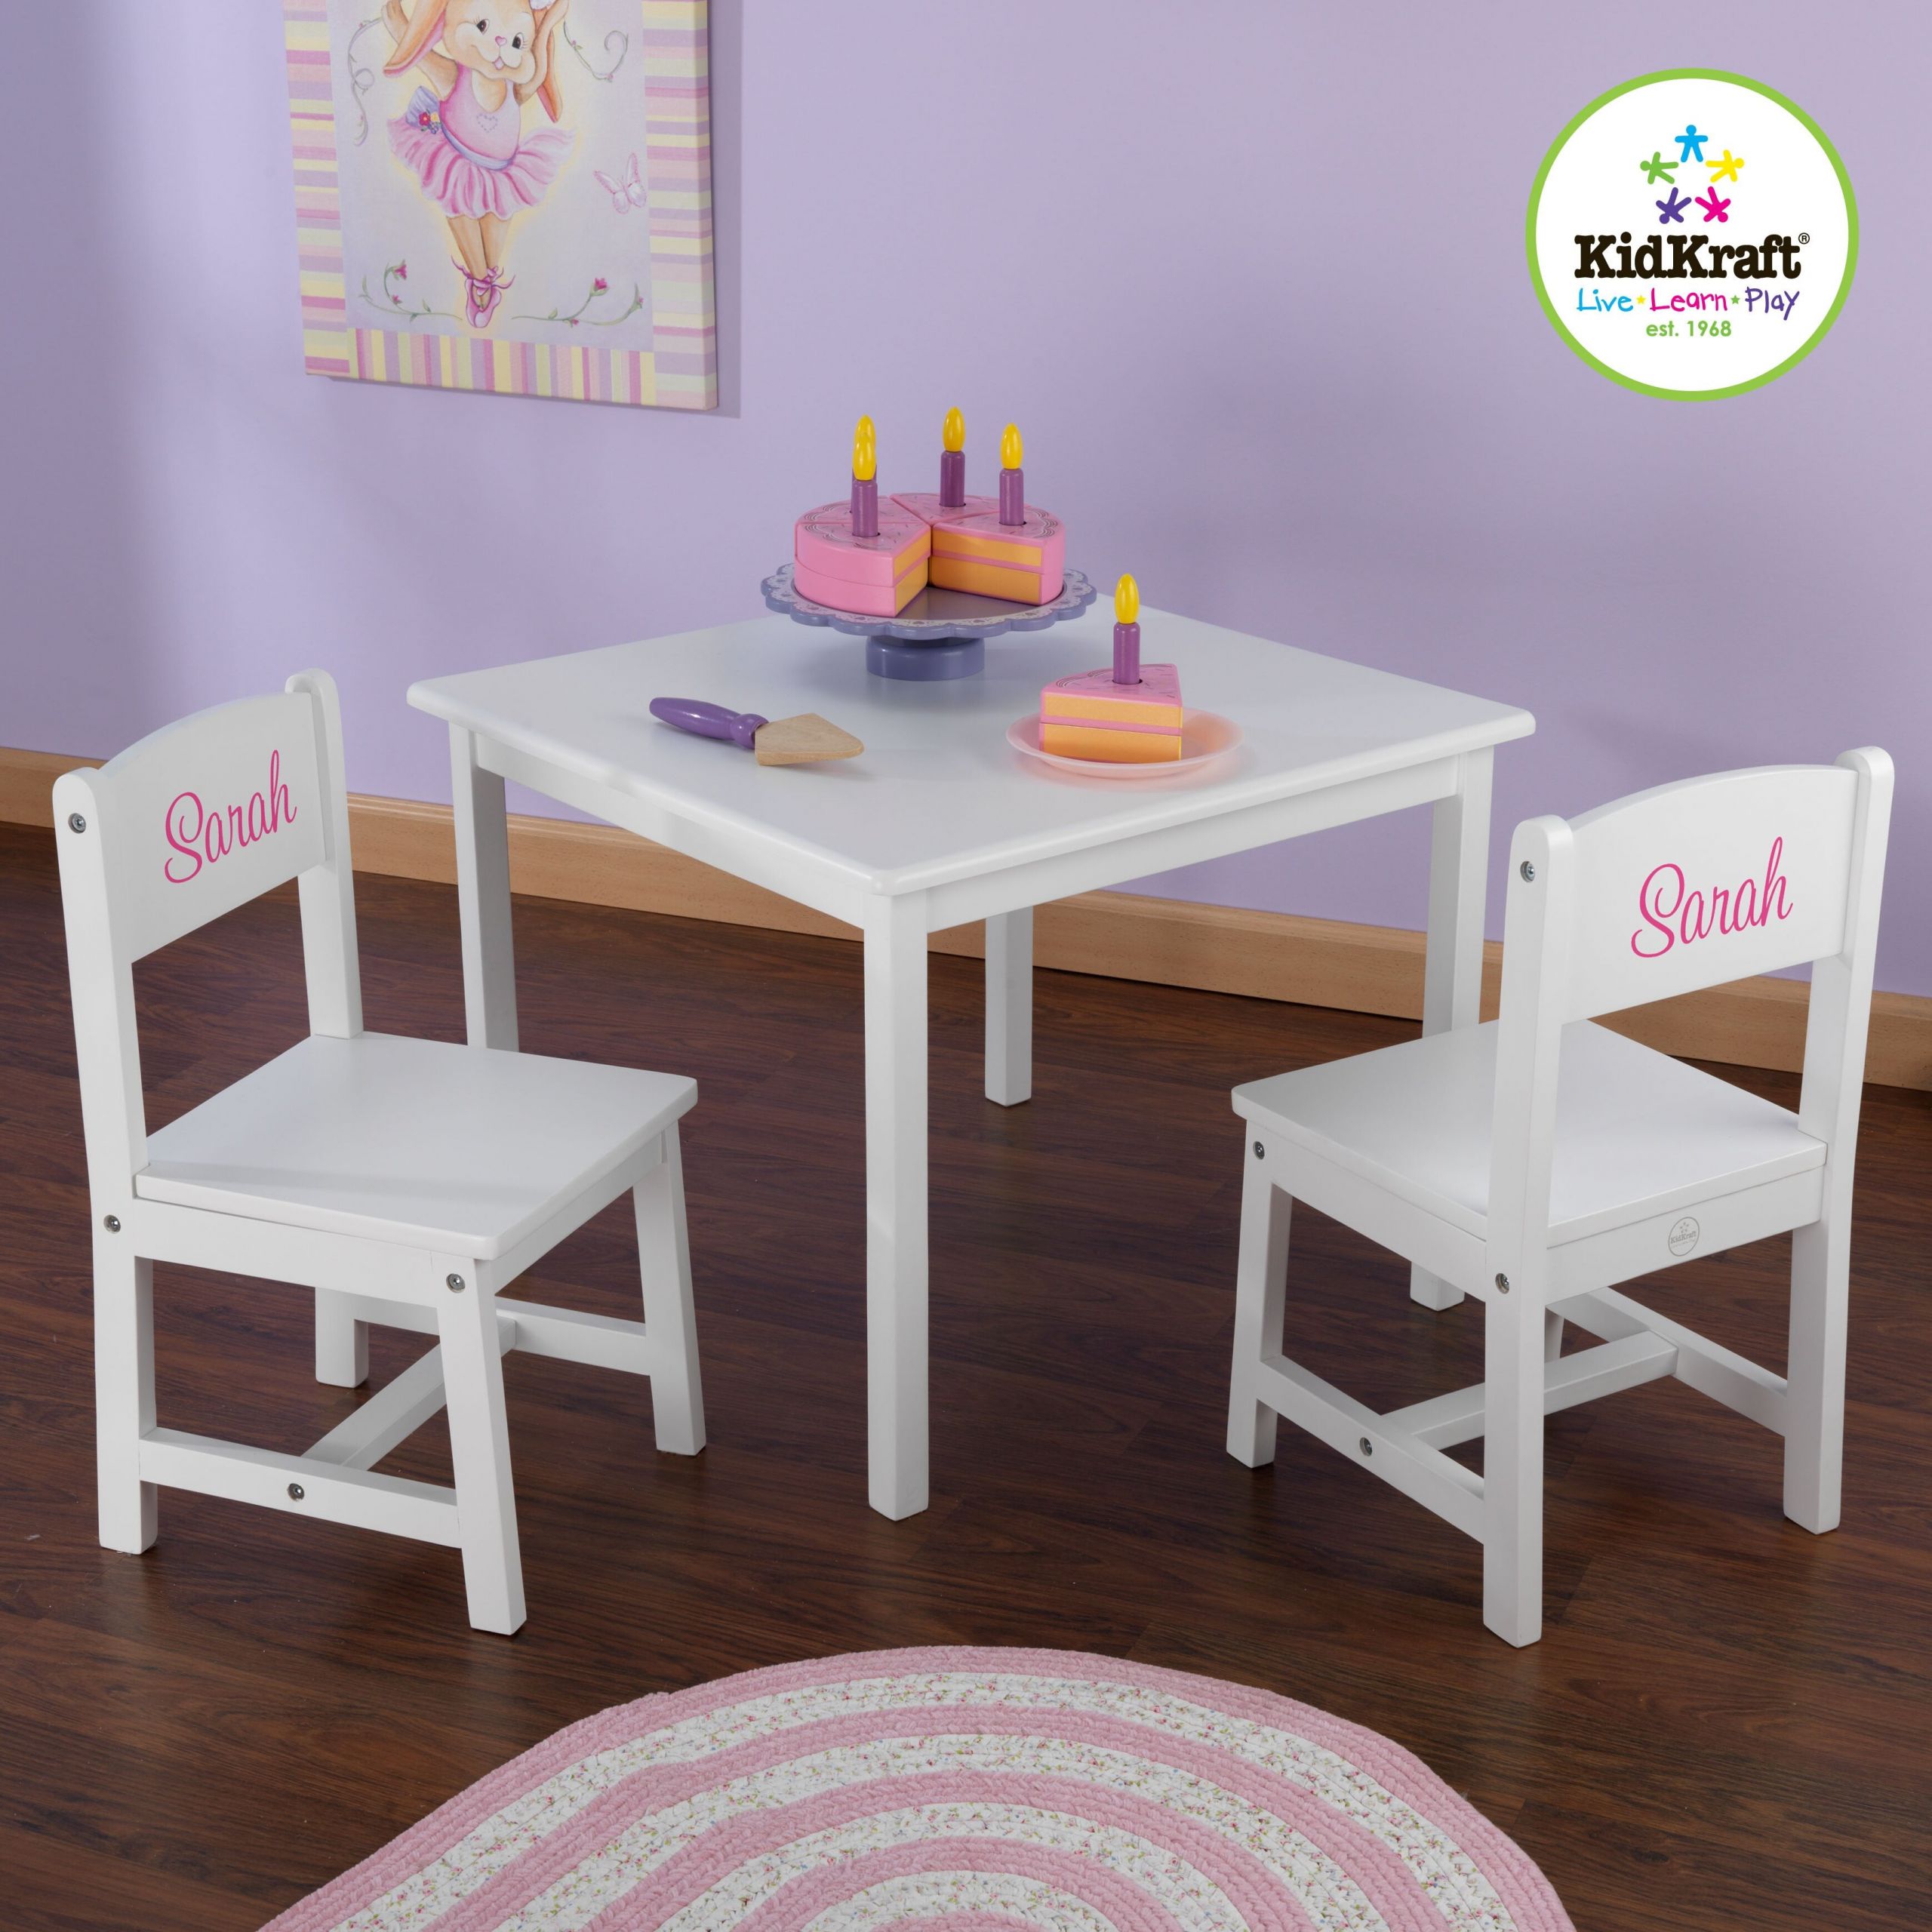 Personalized Kids Chair
 KidKraft Personalized Aspen Kids 3 Piece Table and Chair